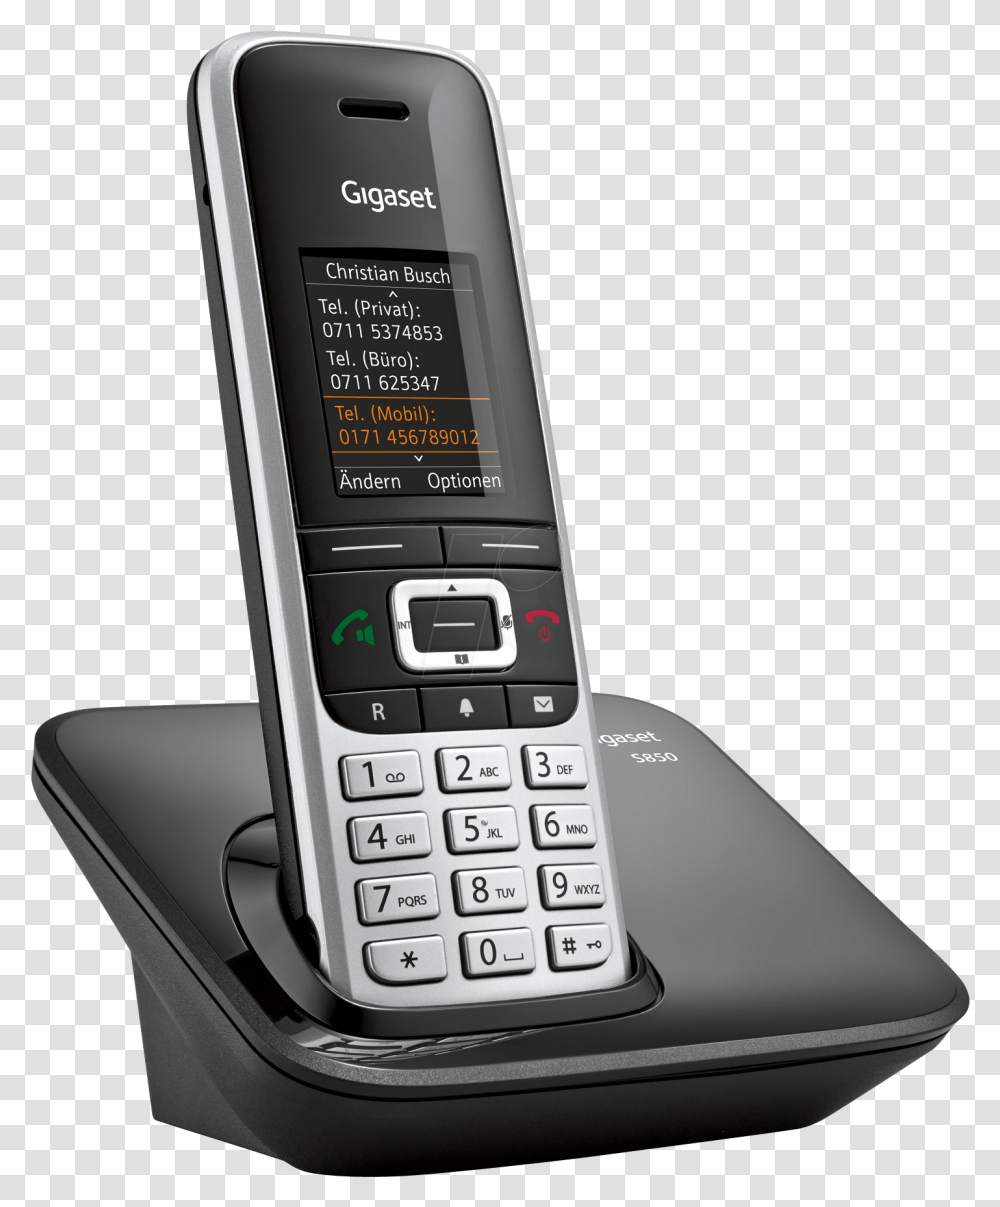 Cordless Telephone Download Gigaset S850a Go, Mobile Phone, Electronics, Cell Phone Transparent Png